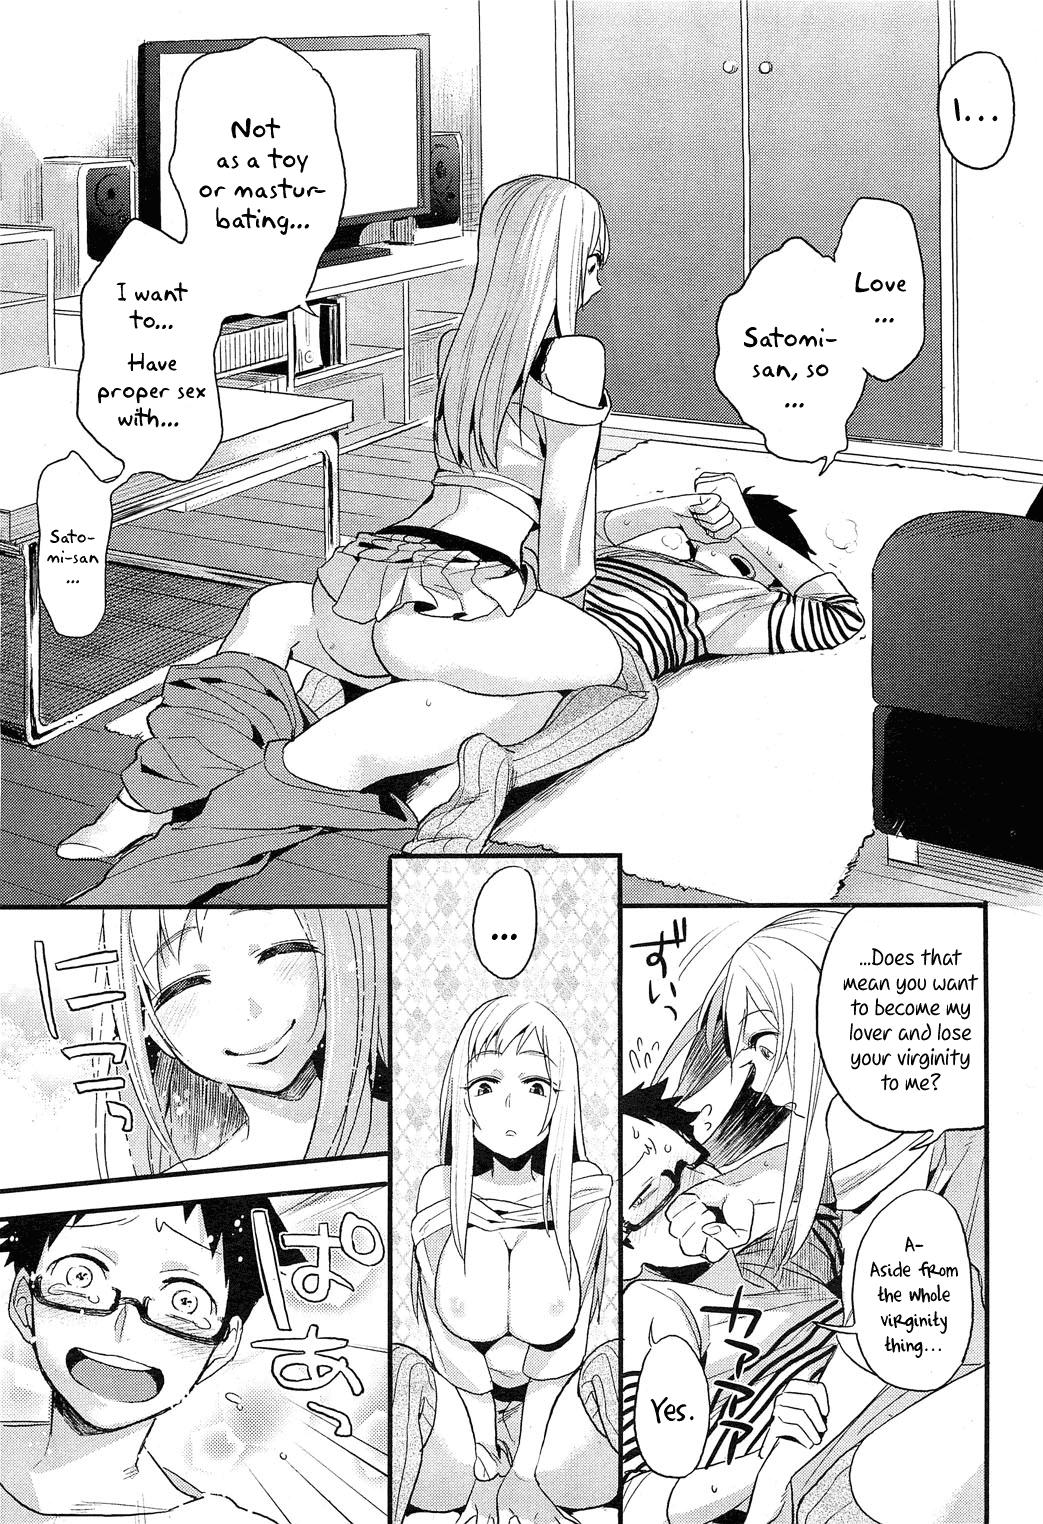 [Igumox] Omocha-kun to Onee-san | A Young Lady And Her Little Toy (COMIC HOTMiLK 2012-12) [English] =LWB= 14